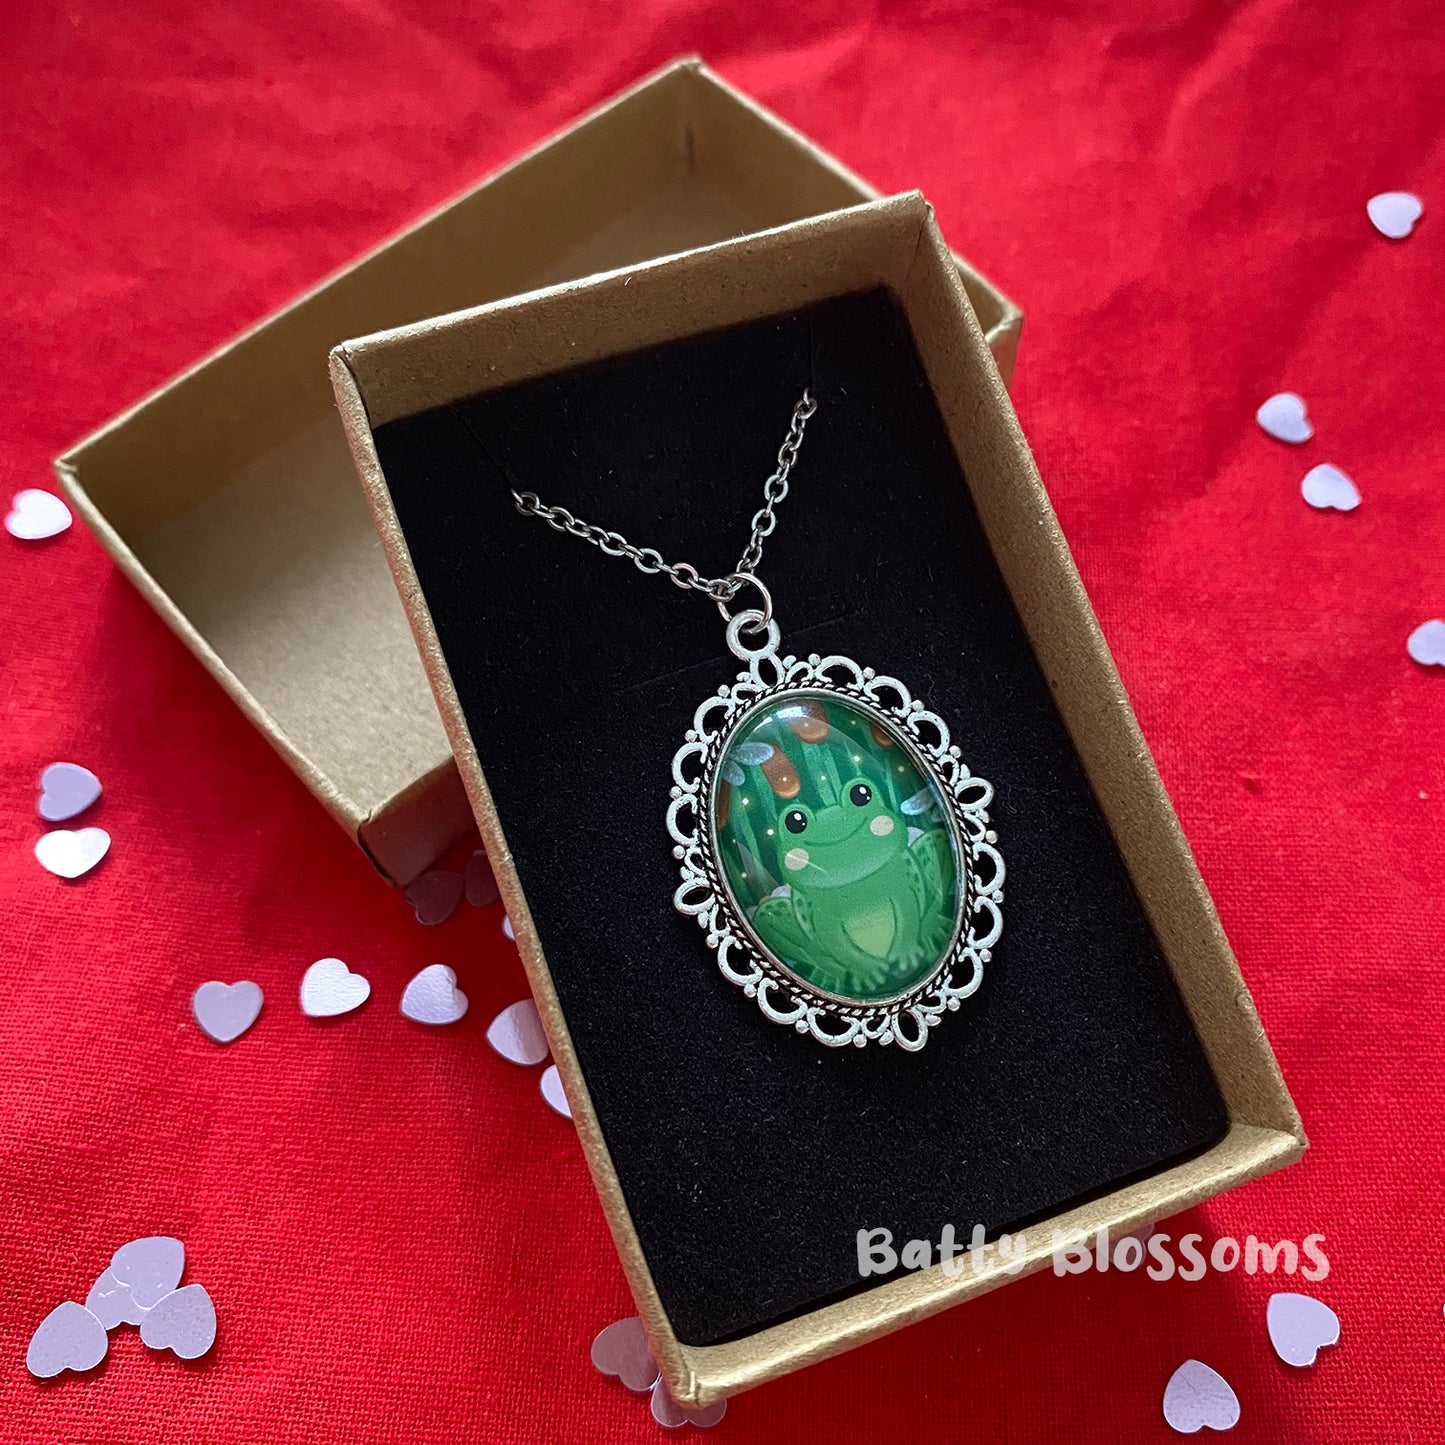 Fairytale Frog cameo necklace